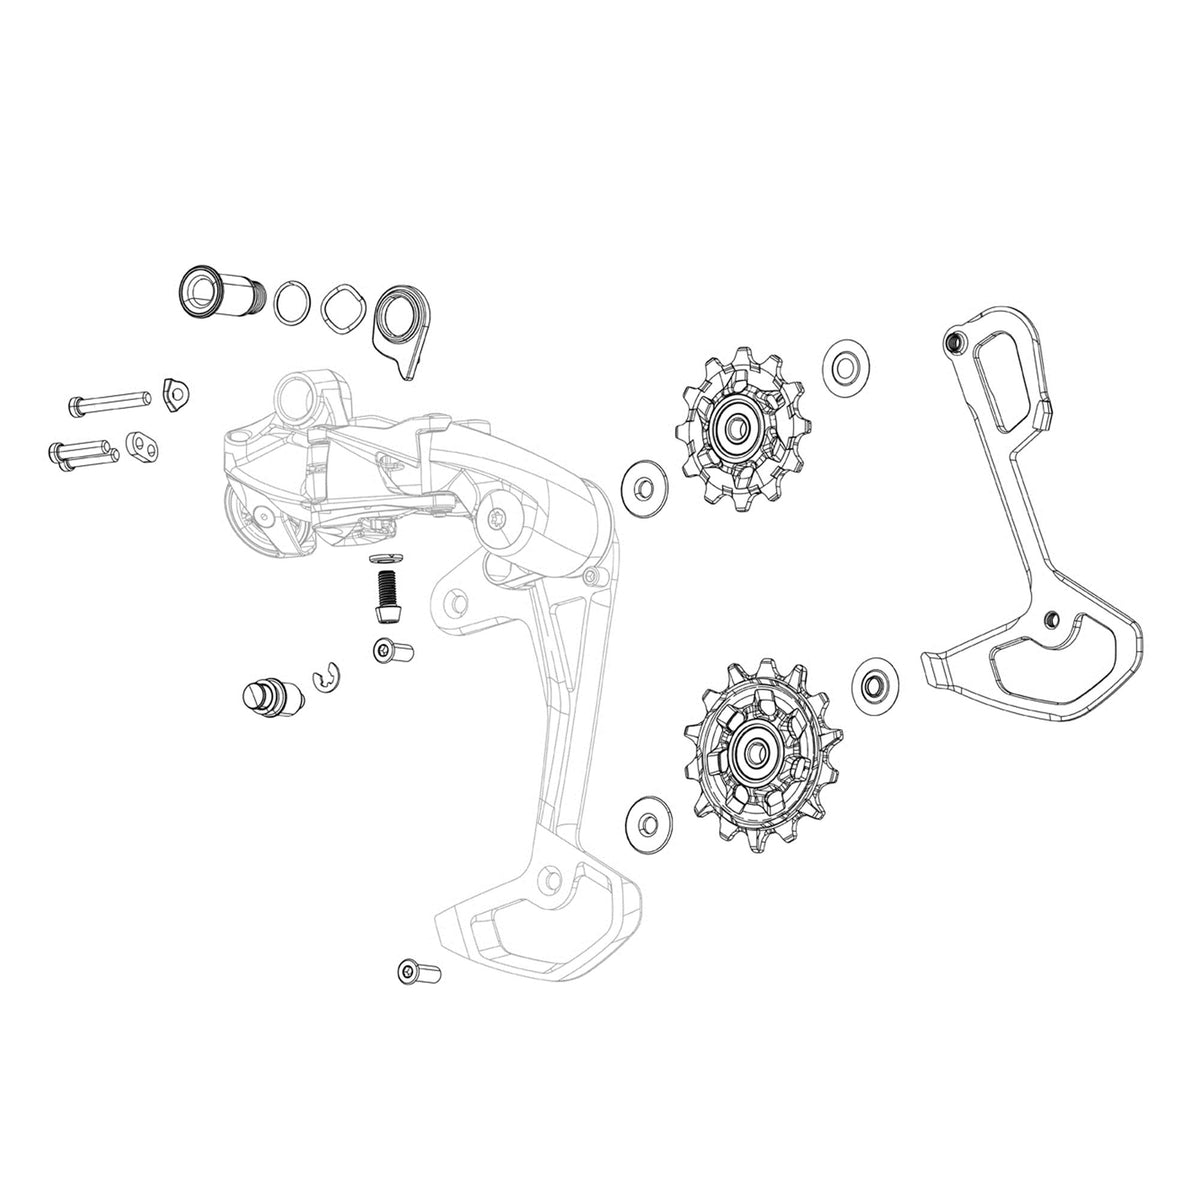 Sram Rear Derailleur Inner Link Bolt Kit For Eagle AXS Derailleurs Includes 1 Screw And Washer Default Title